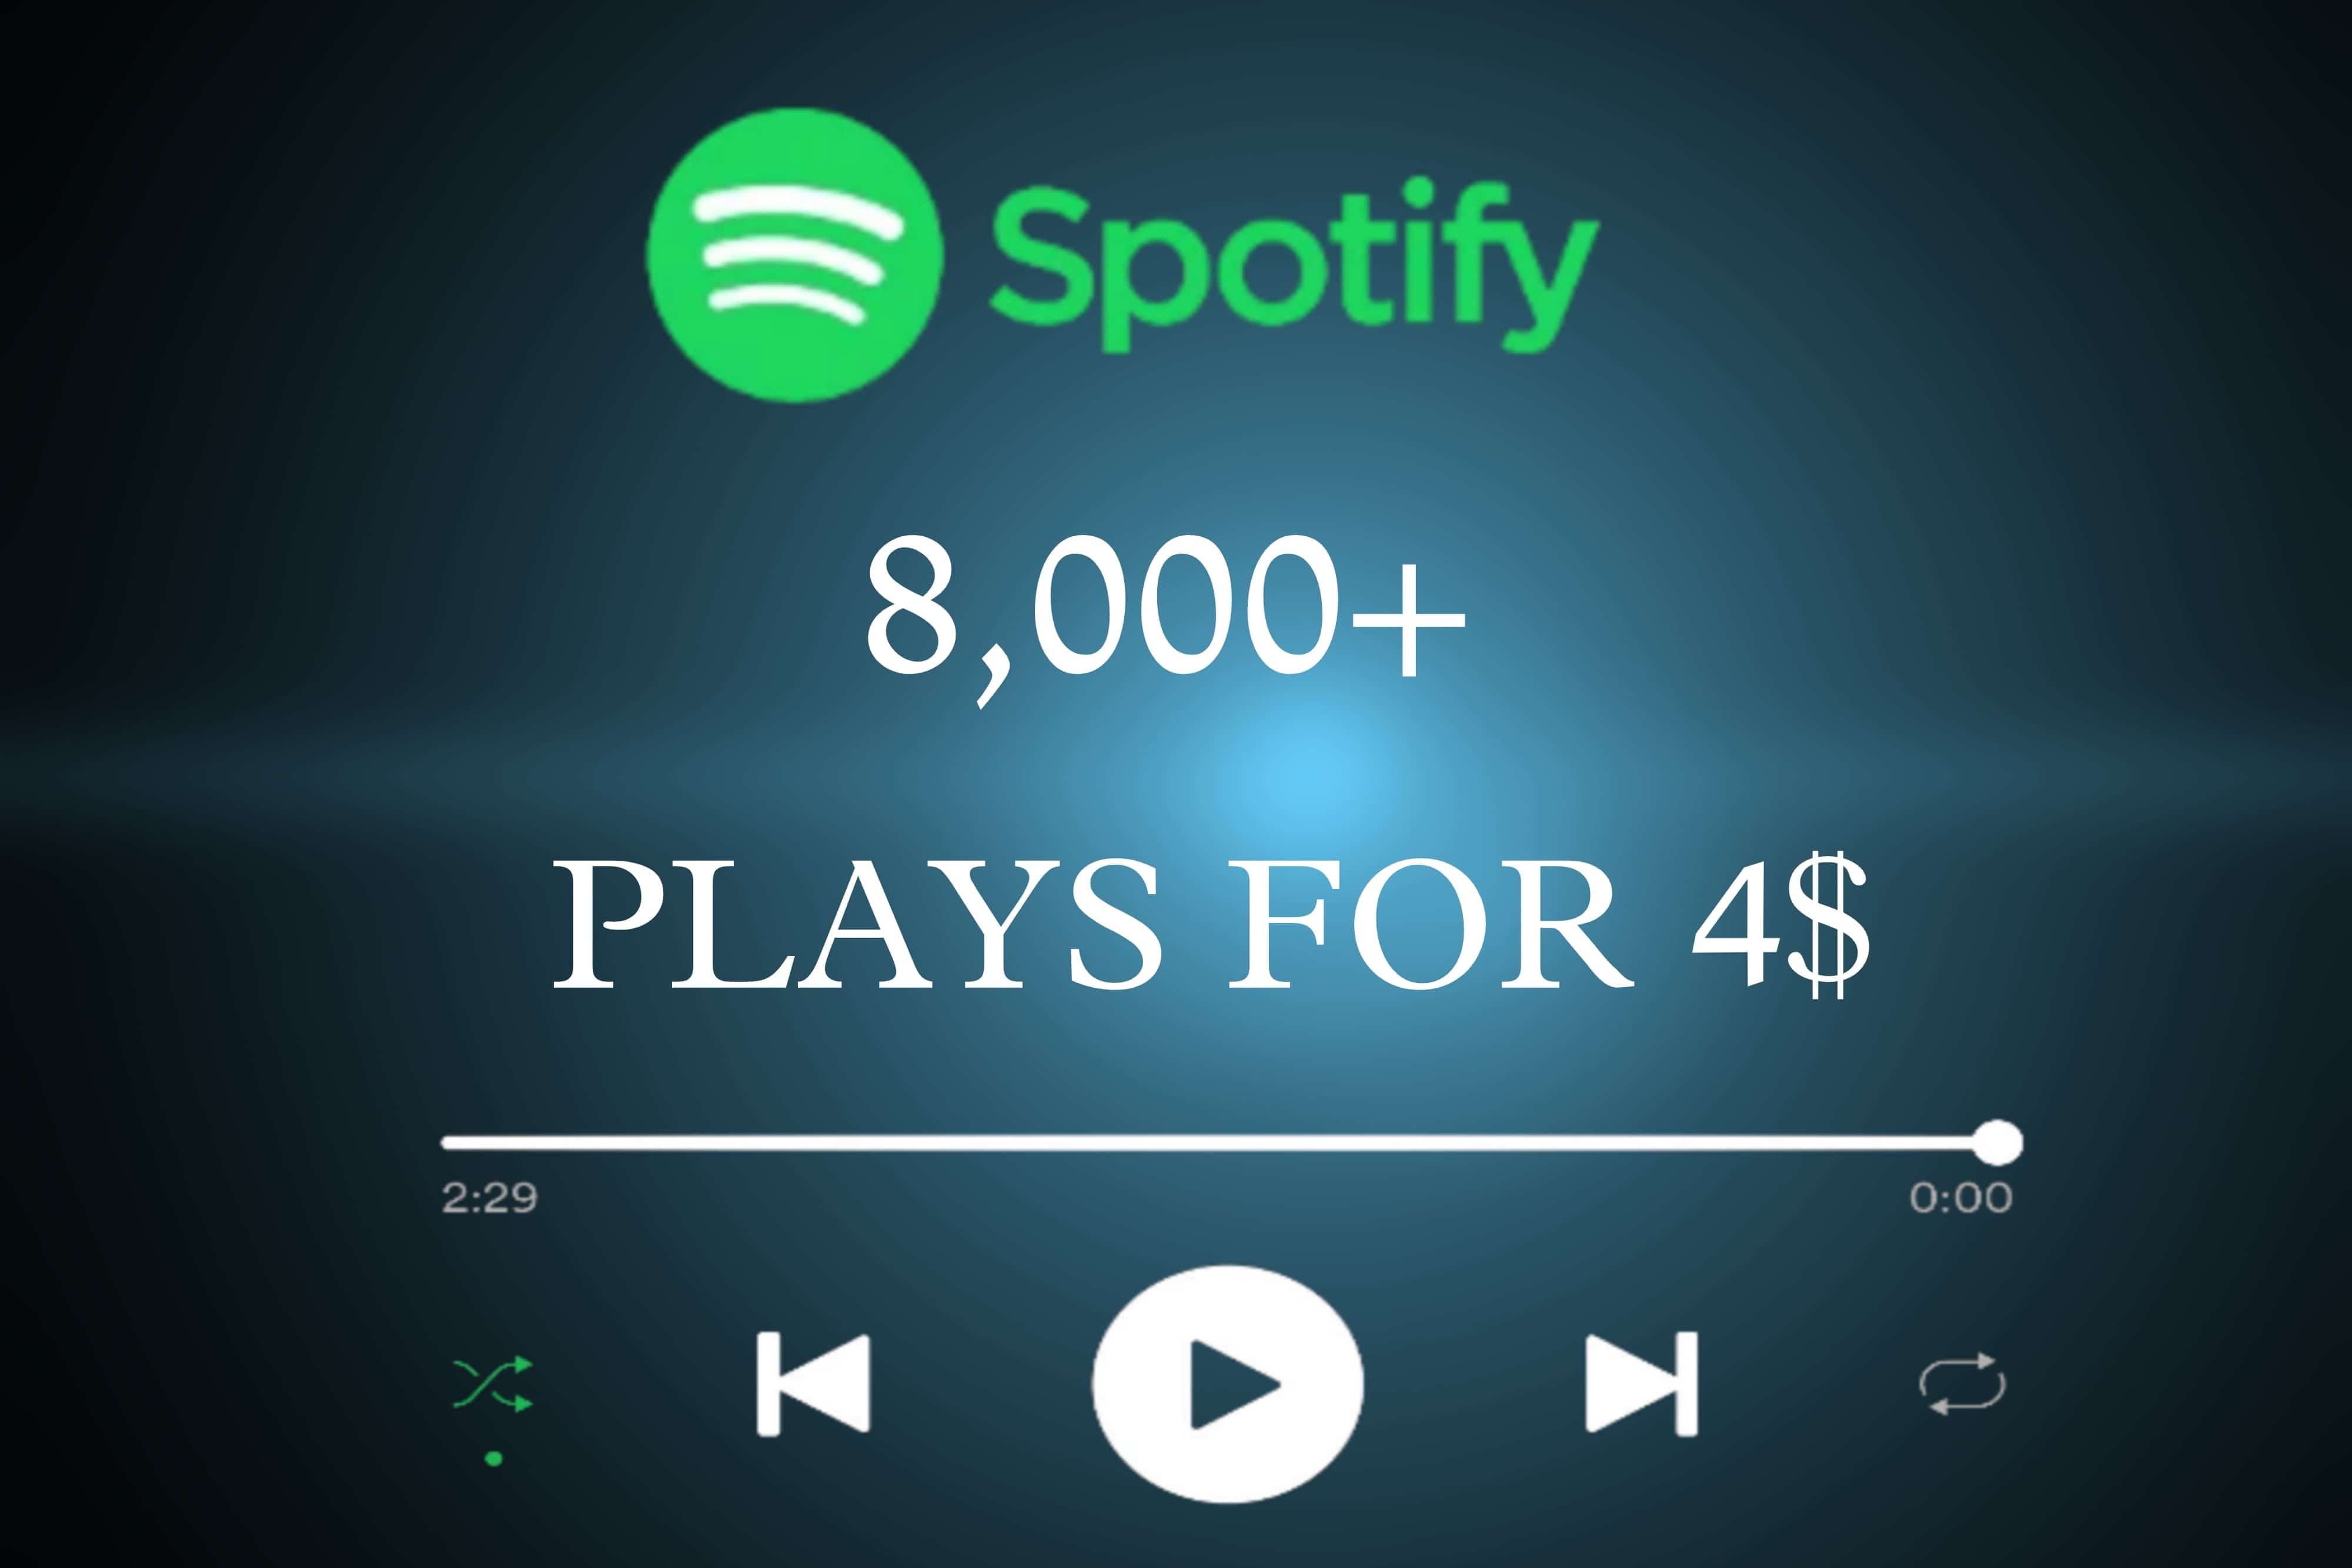 8,000+ SPOTIFY PLAYS LIFETIME GUARENTEE FOR 4$